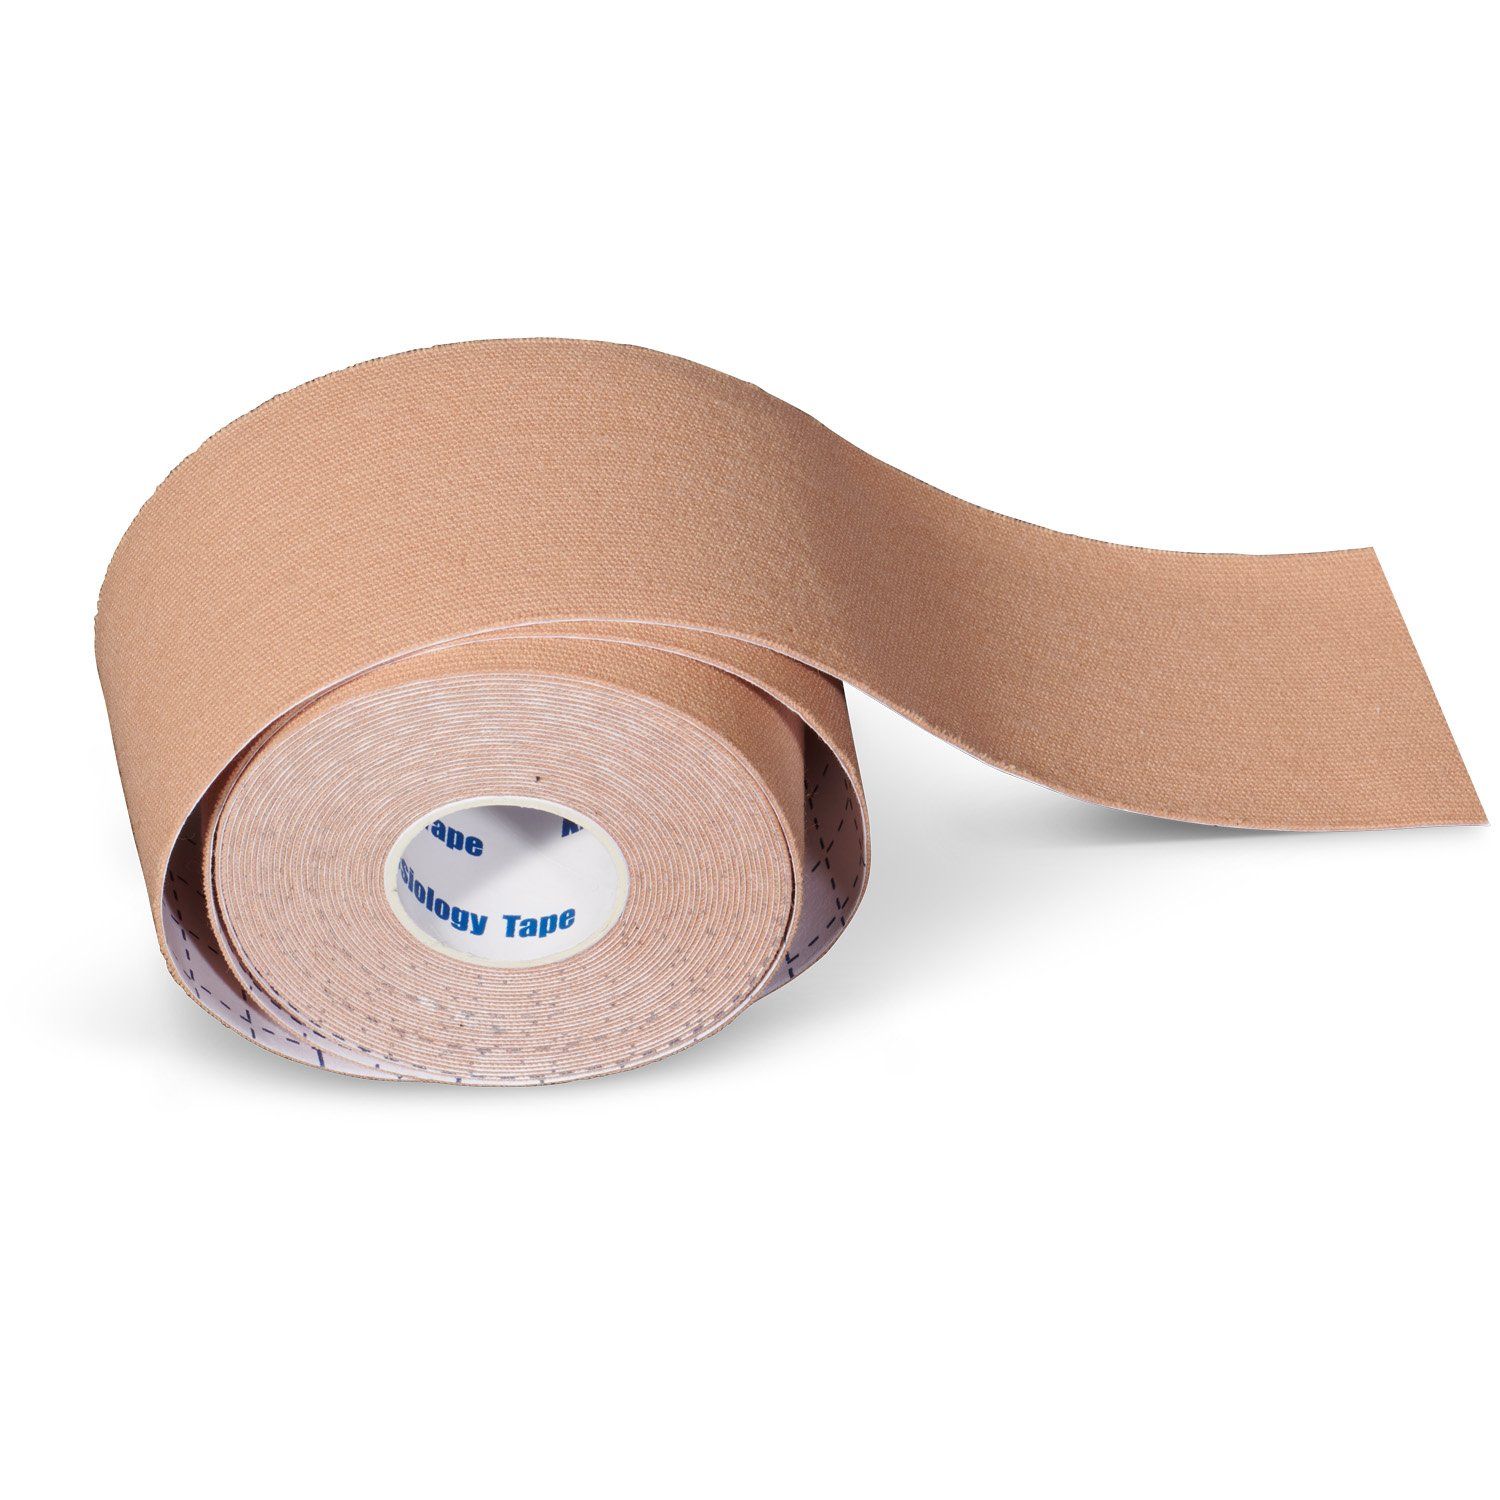 kinesiology tape 4 rolls plus 1 roll for free skin